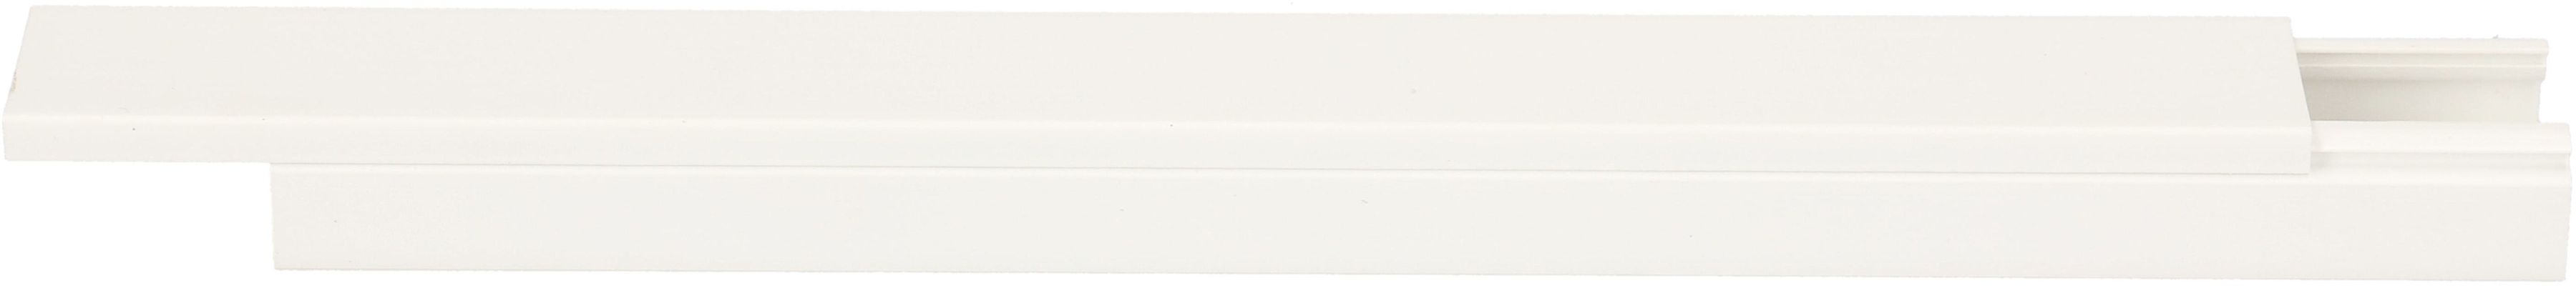 Cable duct white 25x16mm self-adhesive